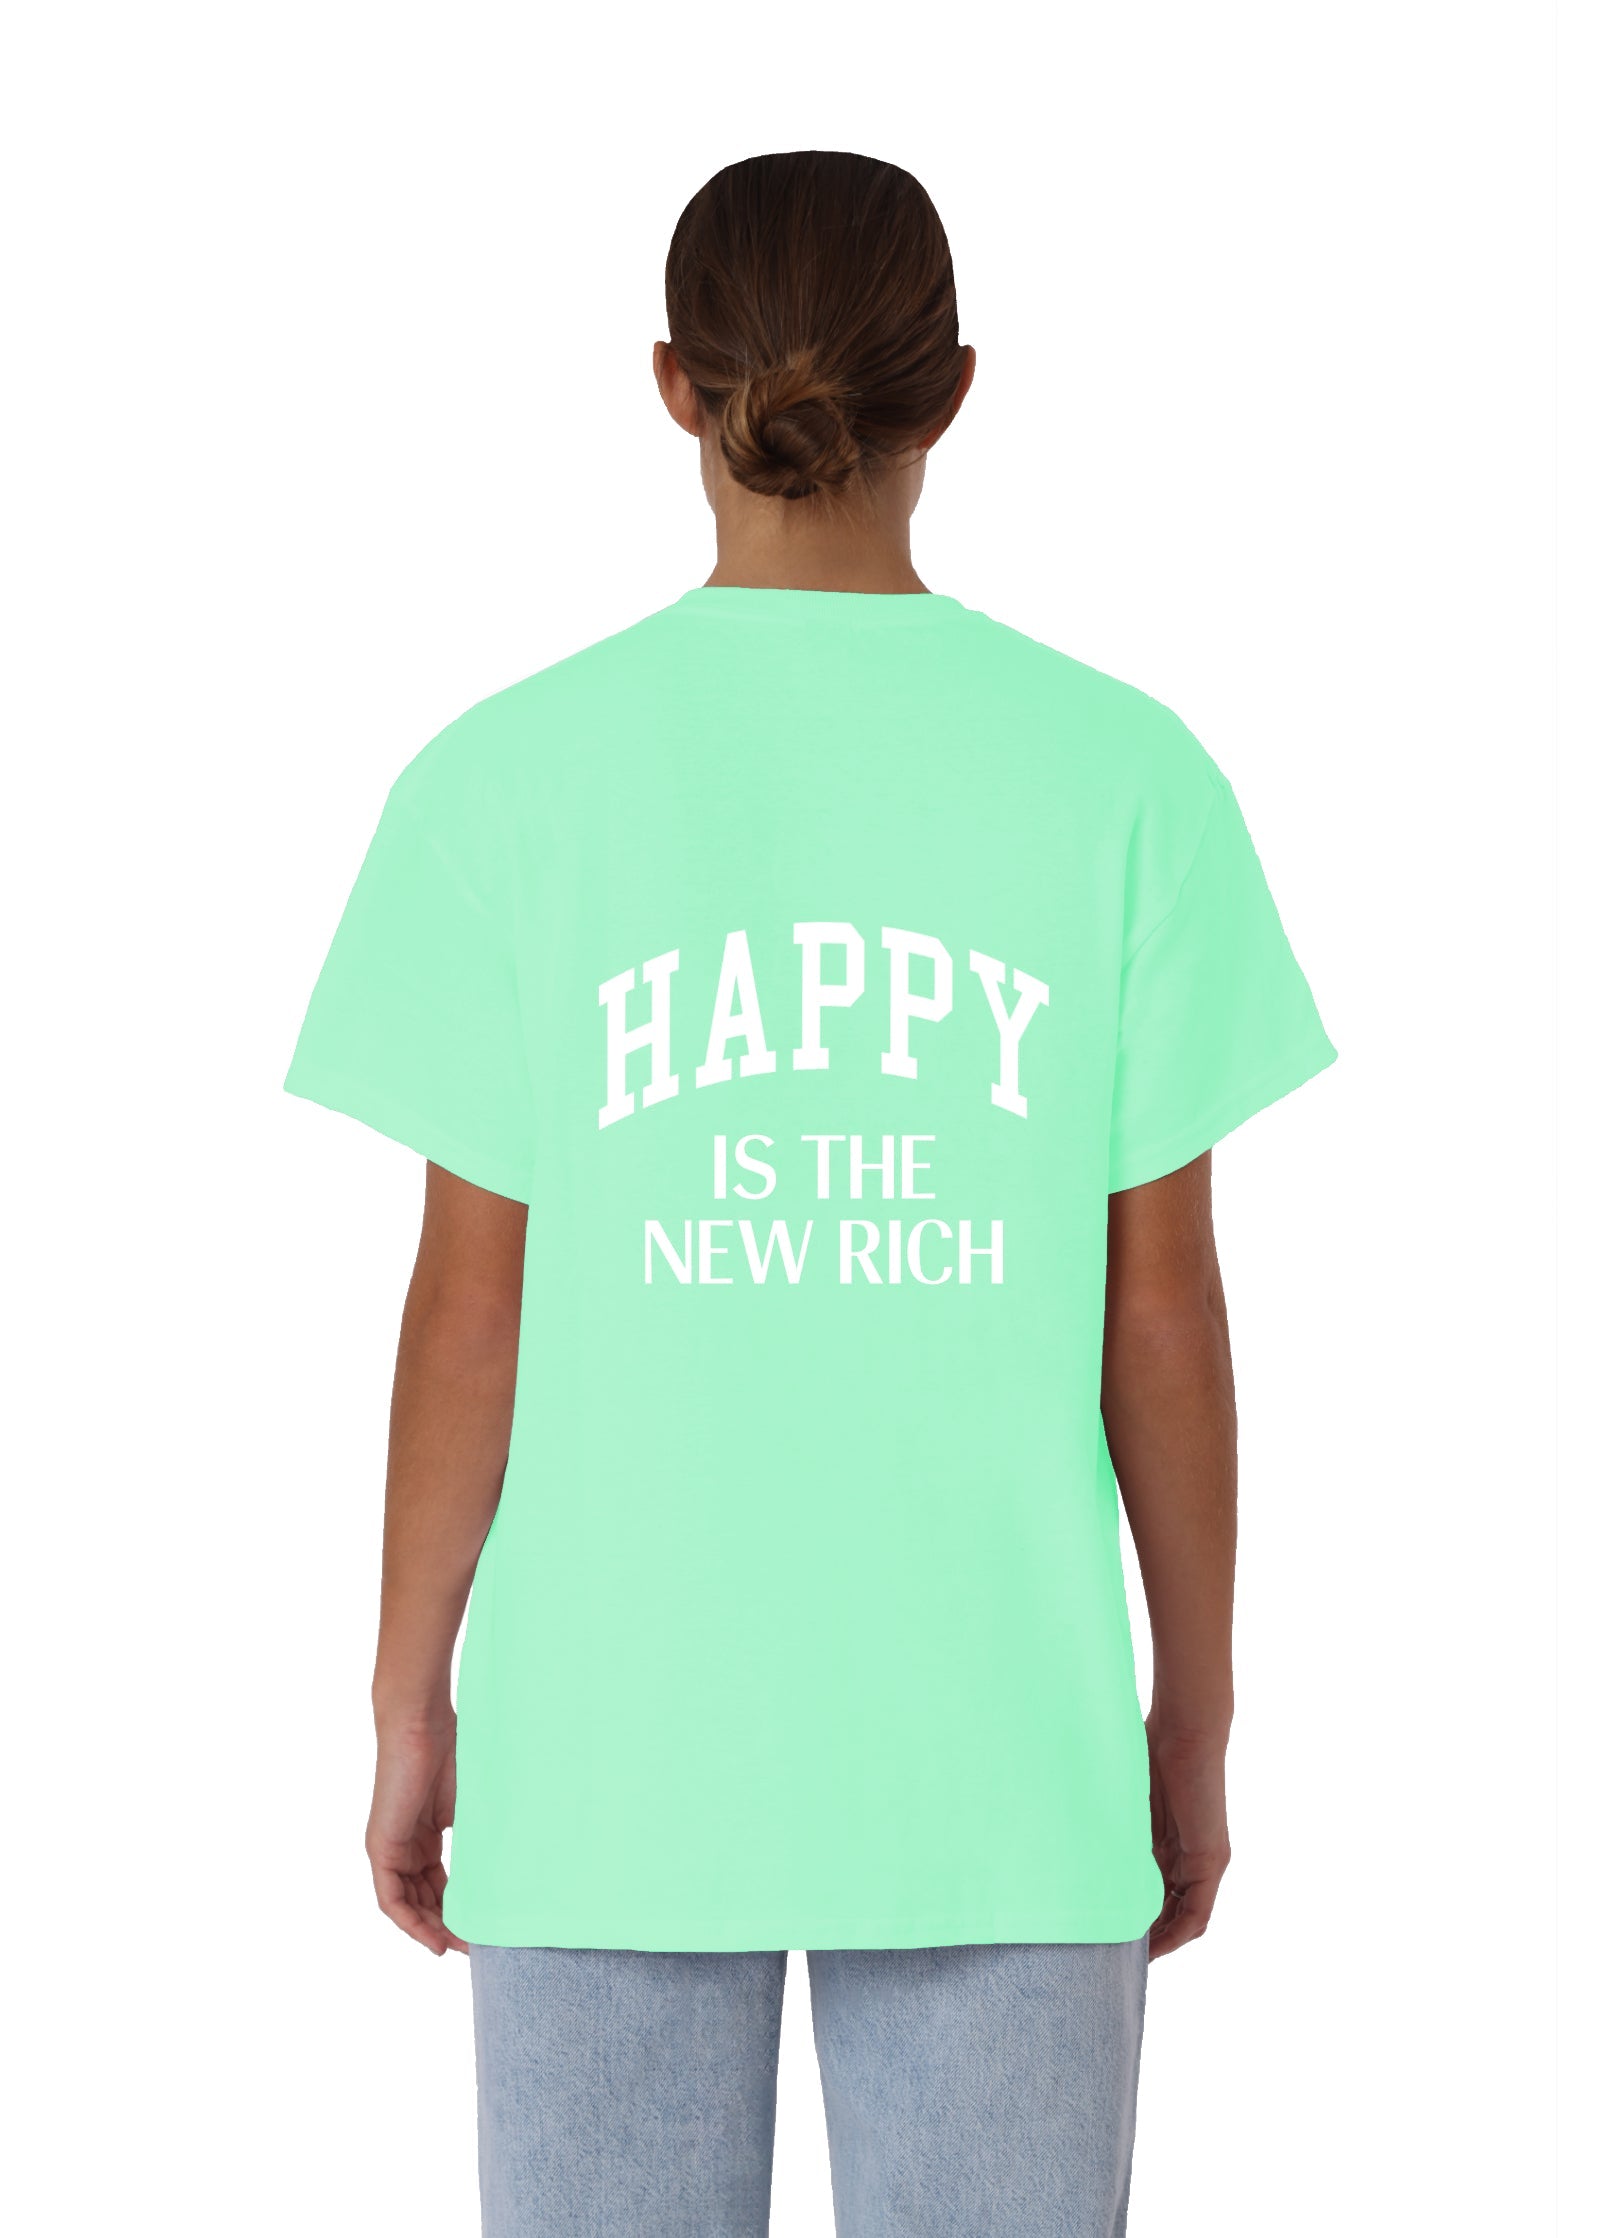 HAPPY IS THE NEW RICH